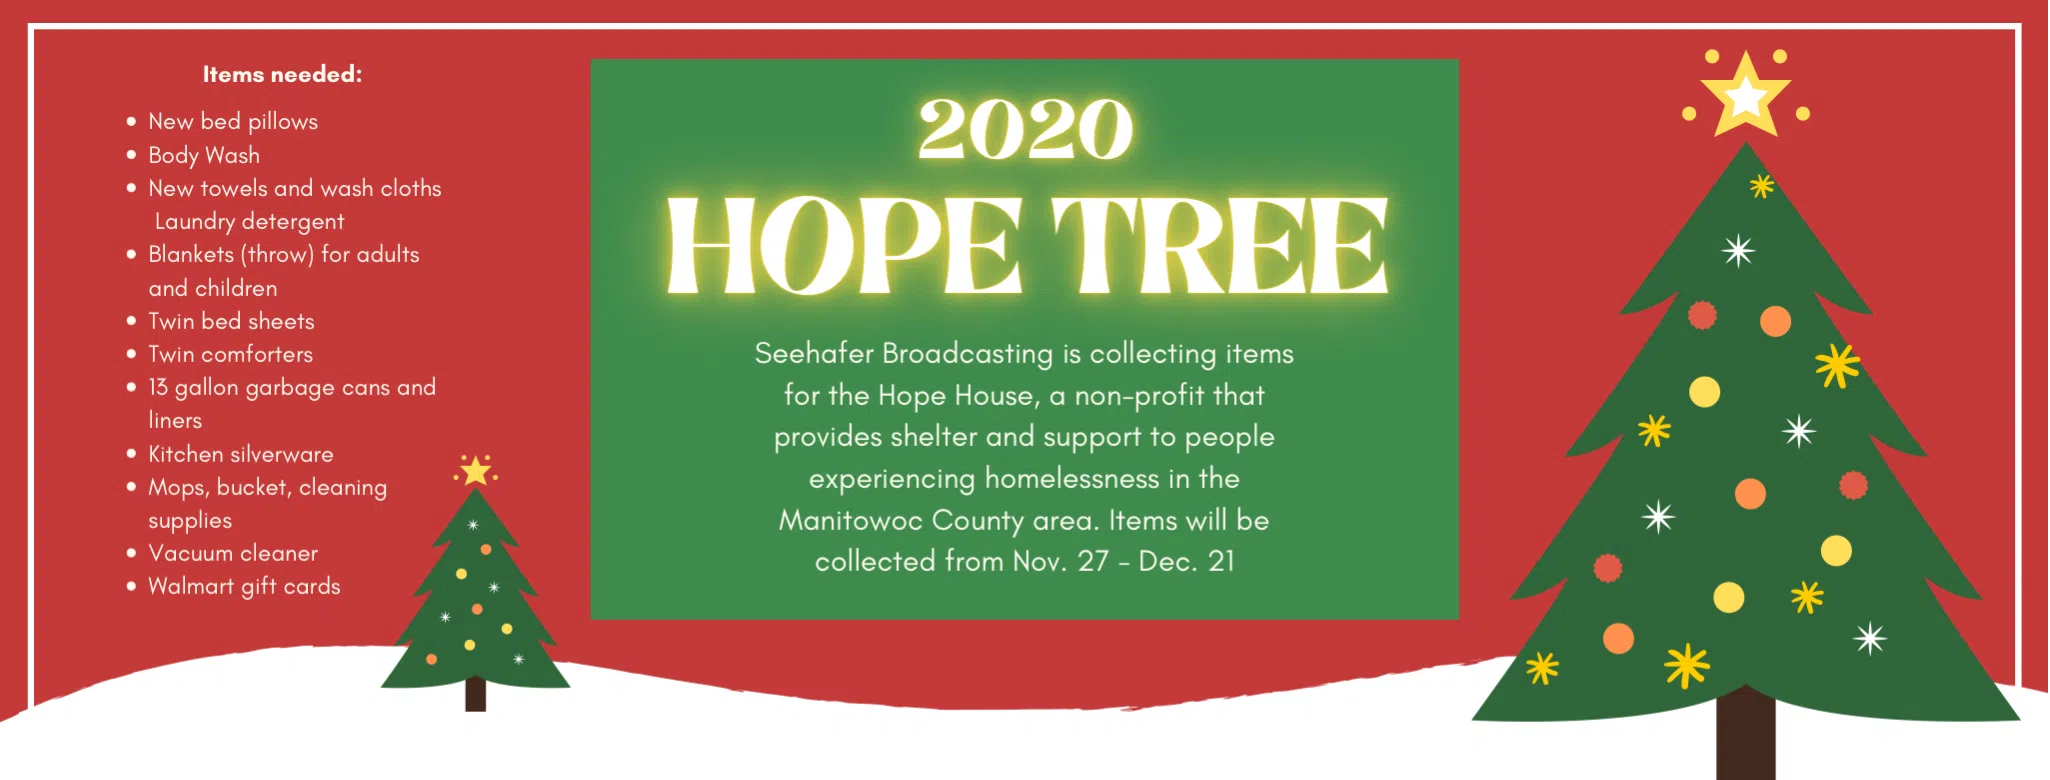 Seehafer Broadcasting Collecting Items for Hope House